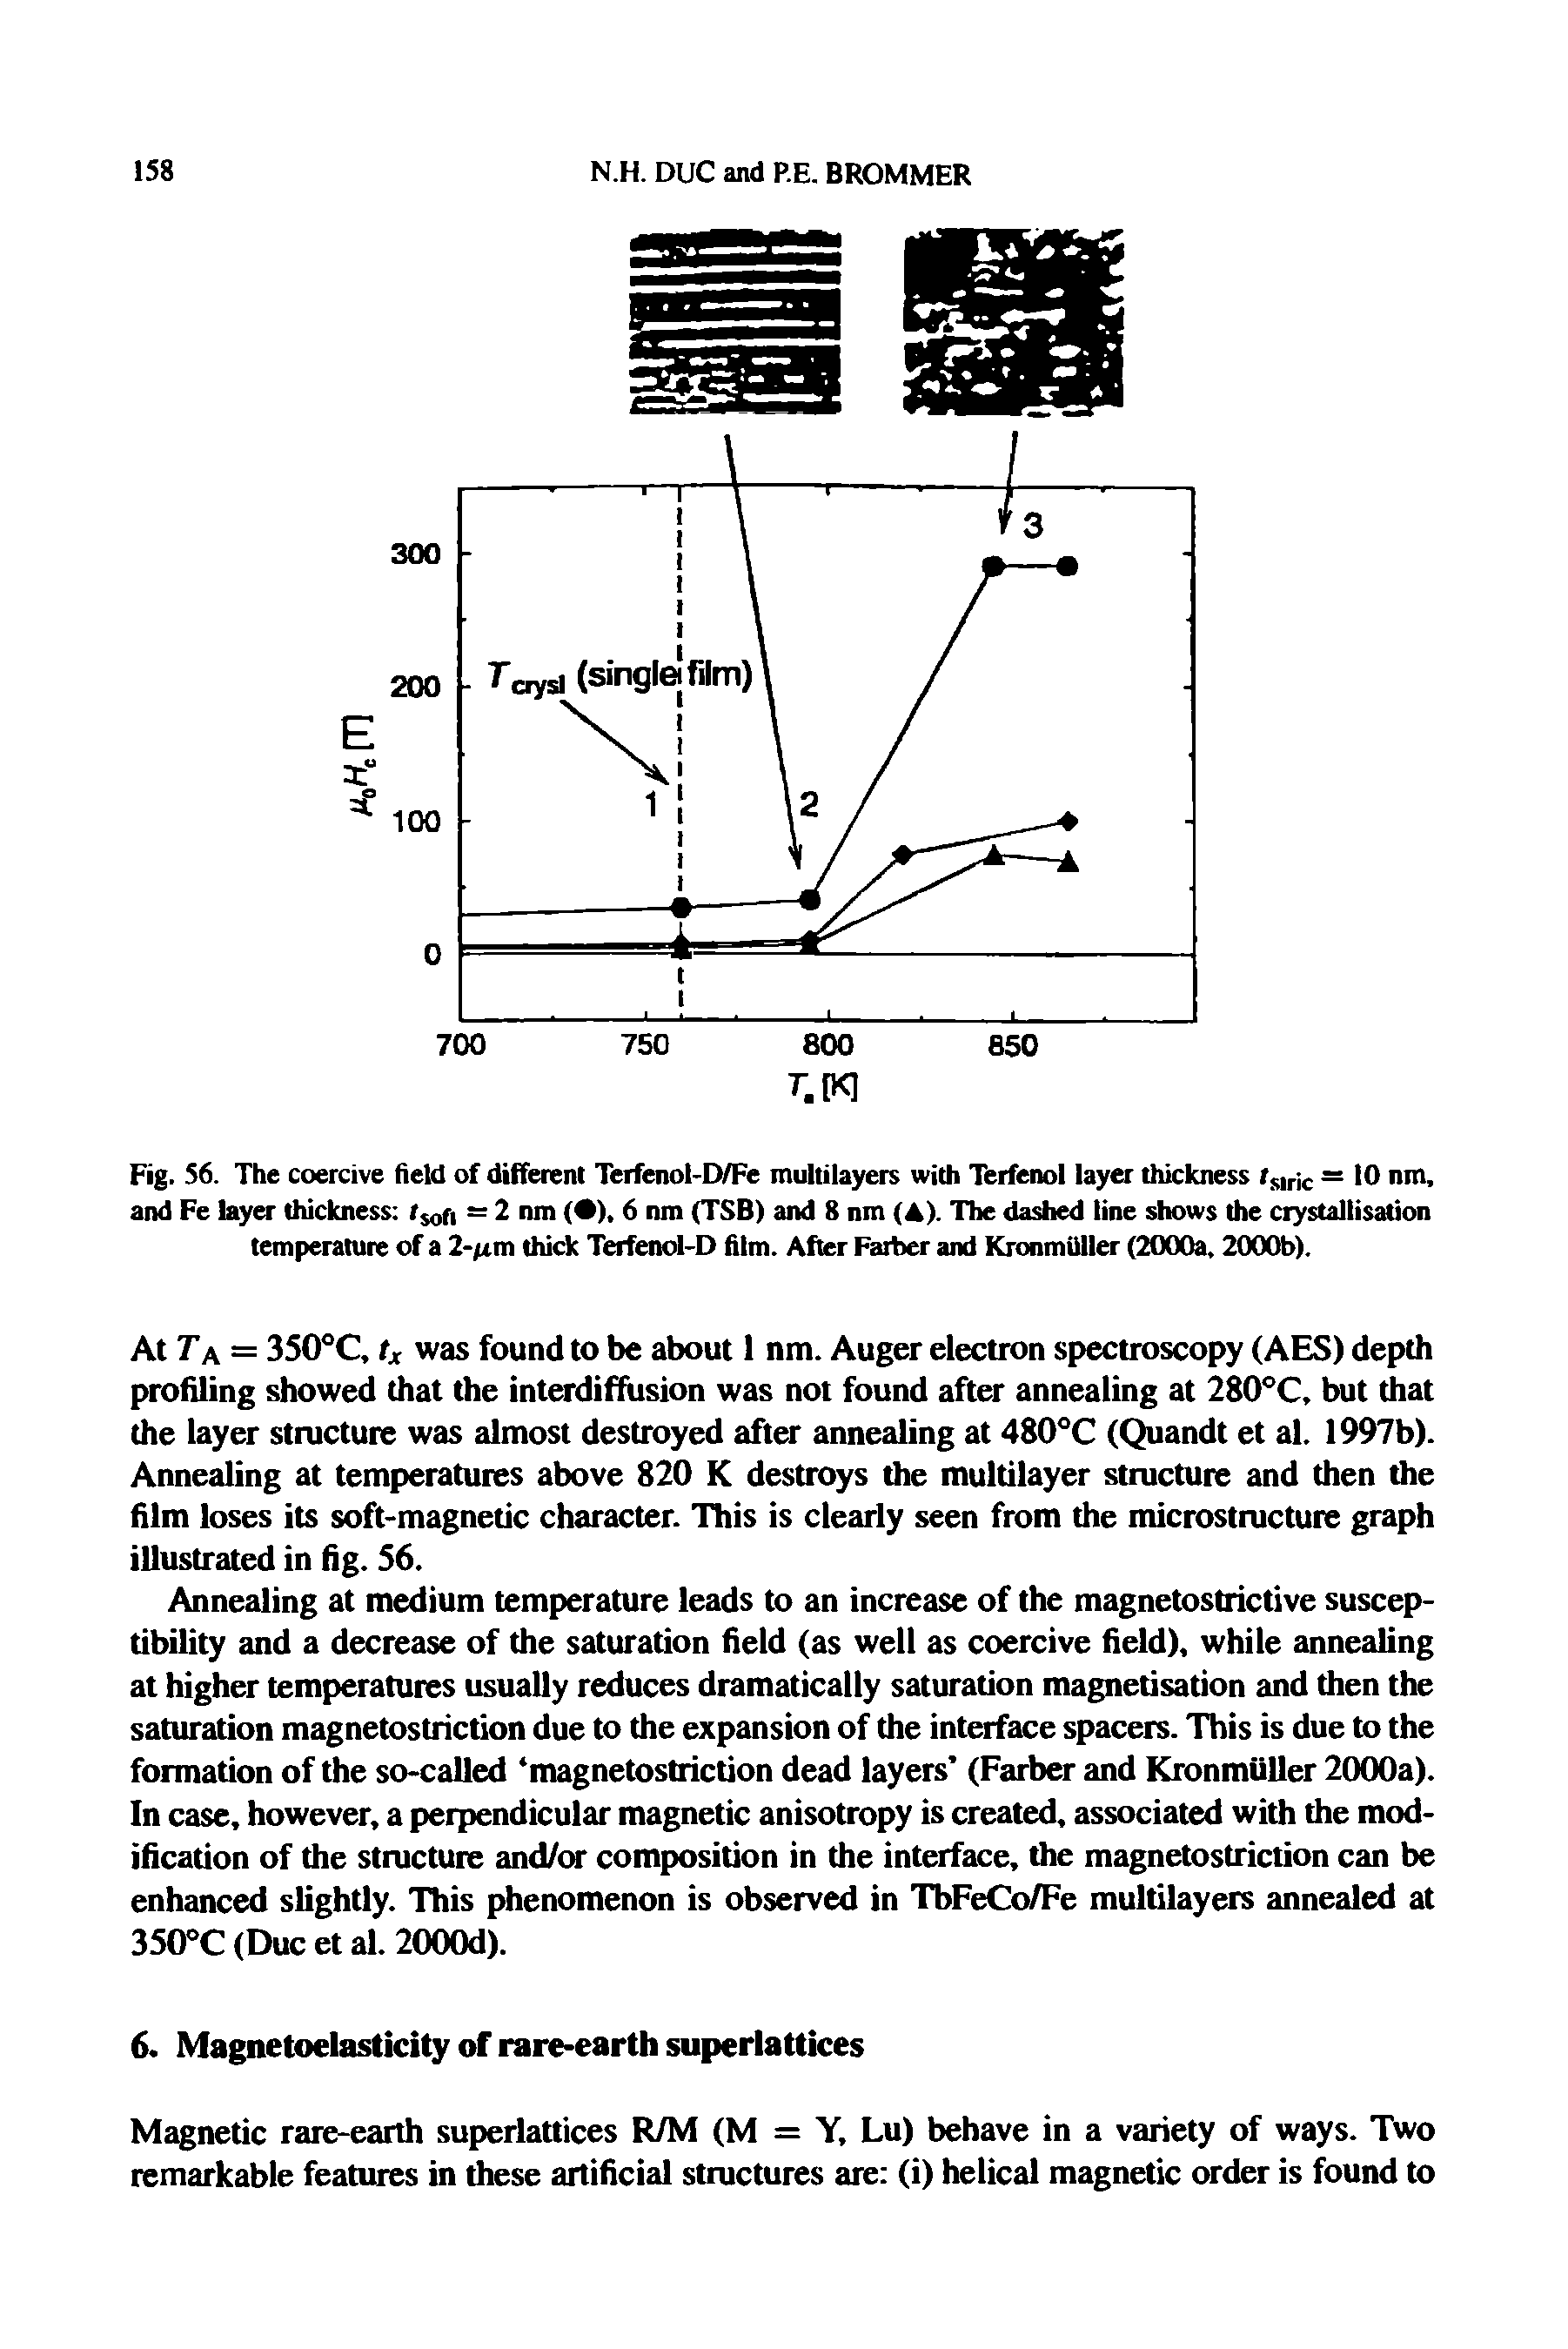 Fig. 56. The coercive field of different Terfenol-D/Fe multilayers with Terfenol layer thickness rs,r c = 10 nm, and Fe layer thickness tMf, — 2 nm ( ), 6 nm (TSB) and 8 nm (A). The dashed line shows the crystallisation temperature of a 2-fim thick Terfenol-D film. After Father and Kronmiiller (2000a, 2000b).